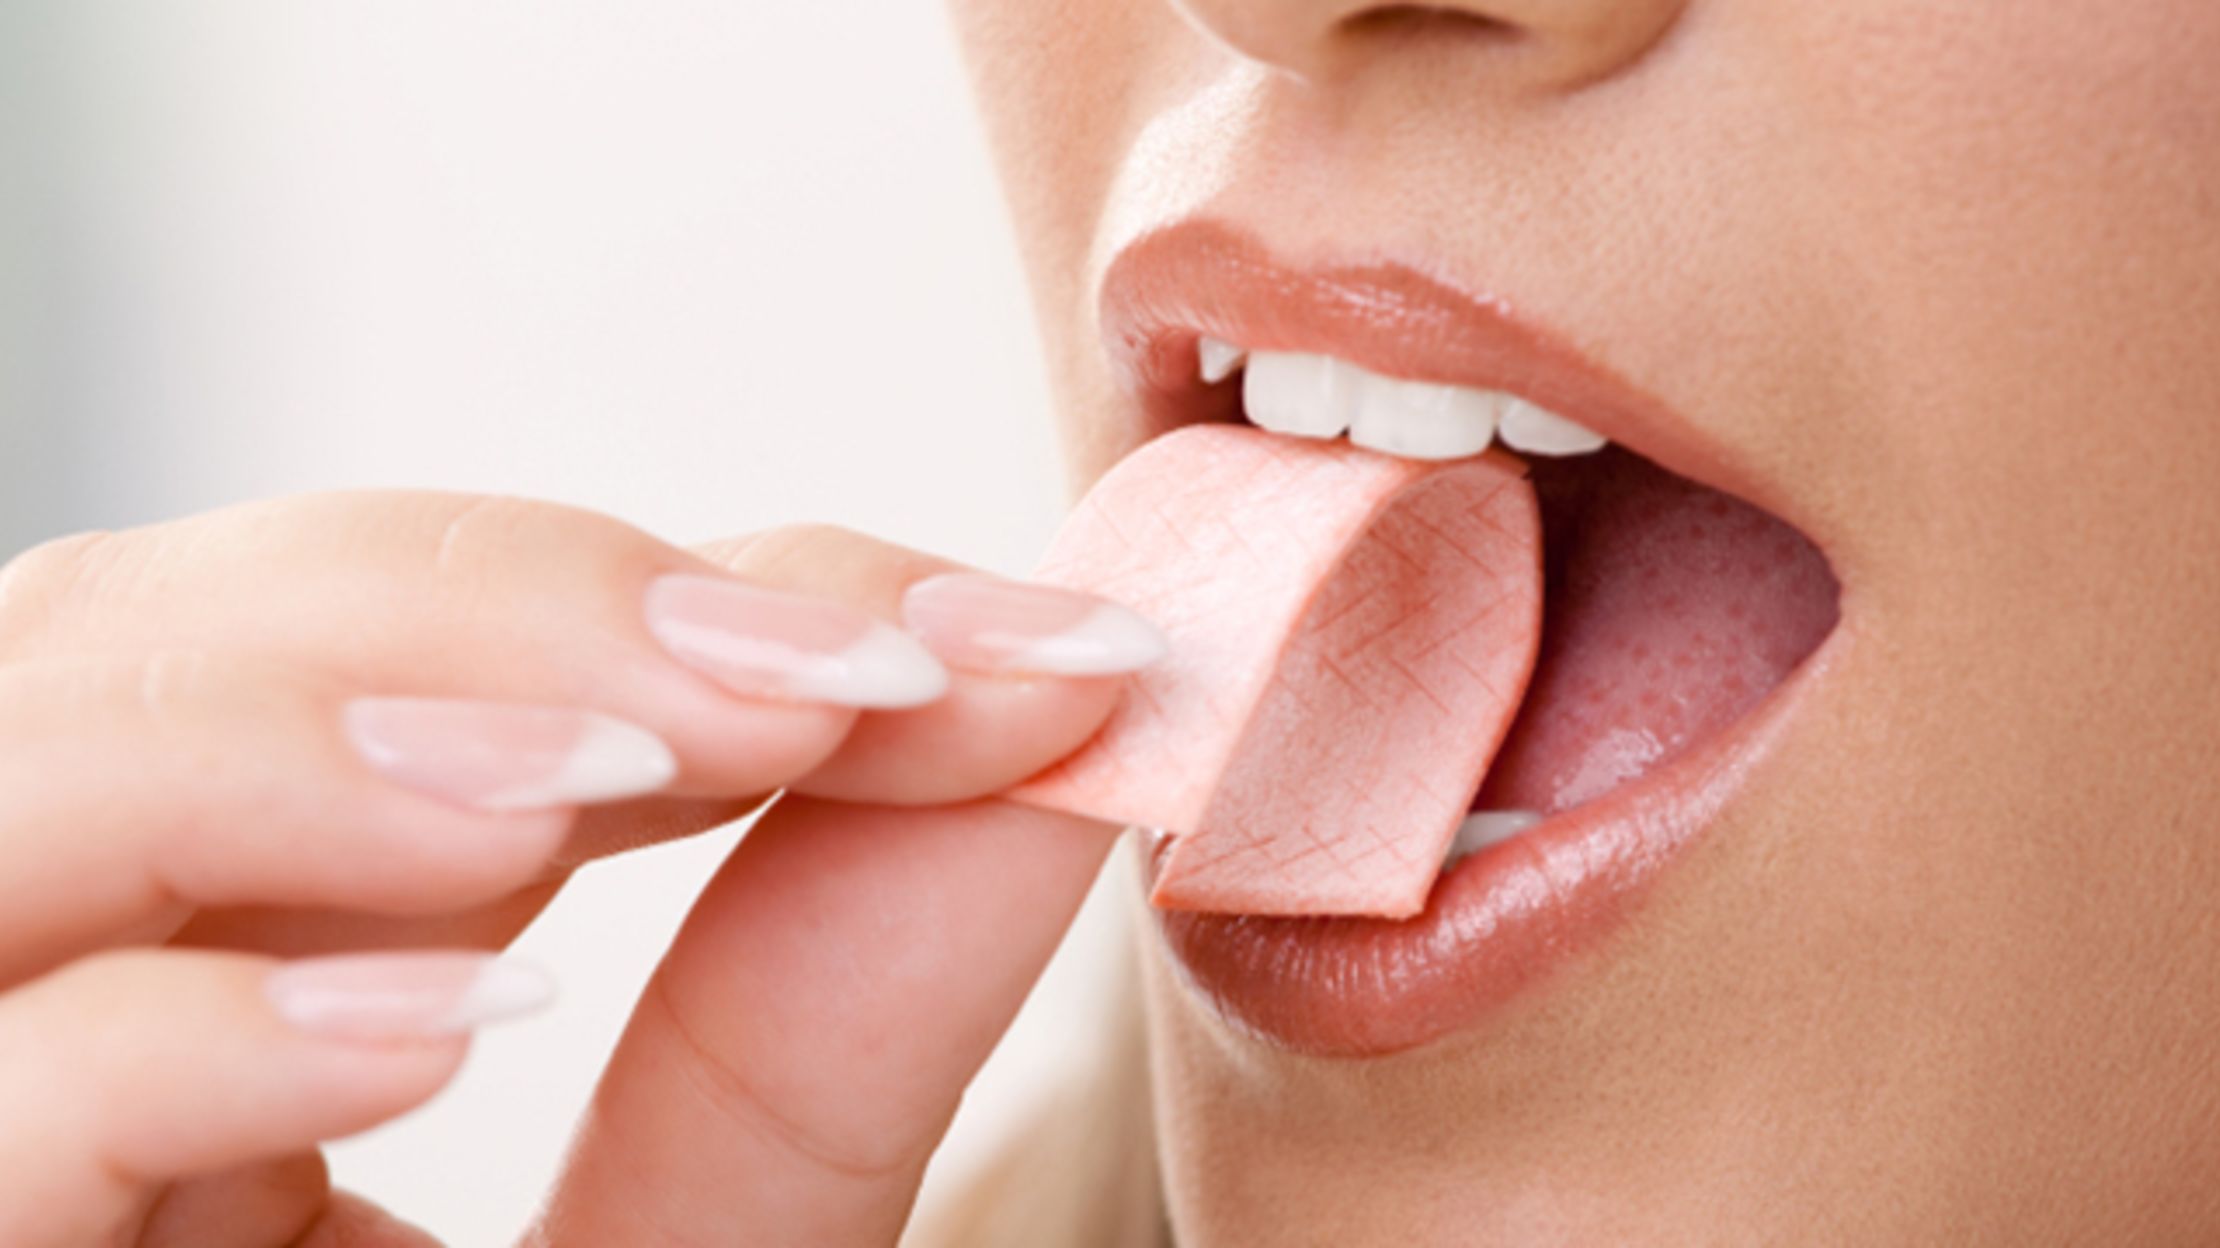 Hate the Sound of People Chewing? You Might Have Misophonia | Mental Floss